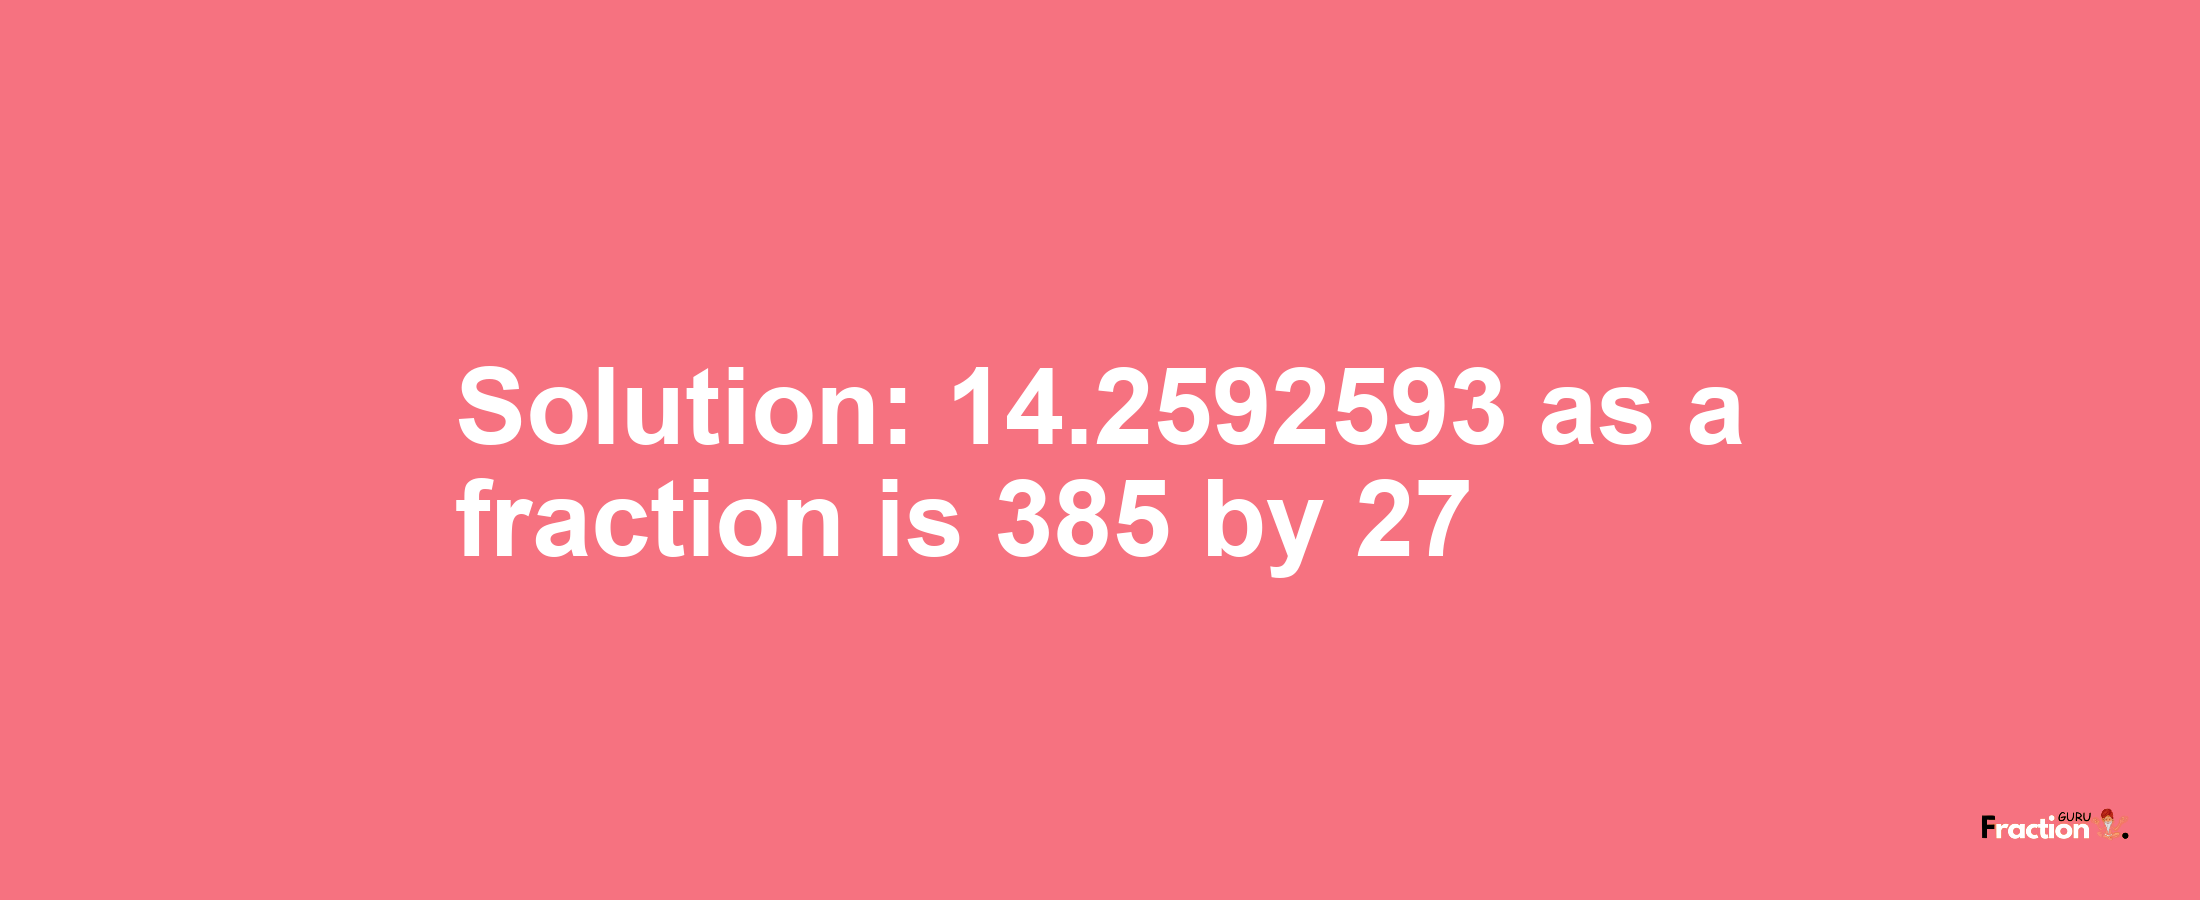 Solution:14.2592593 as a fraction is 385/27